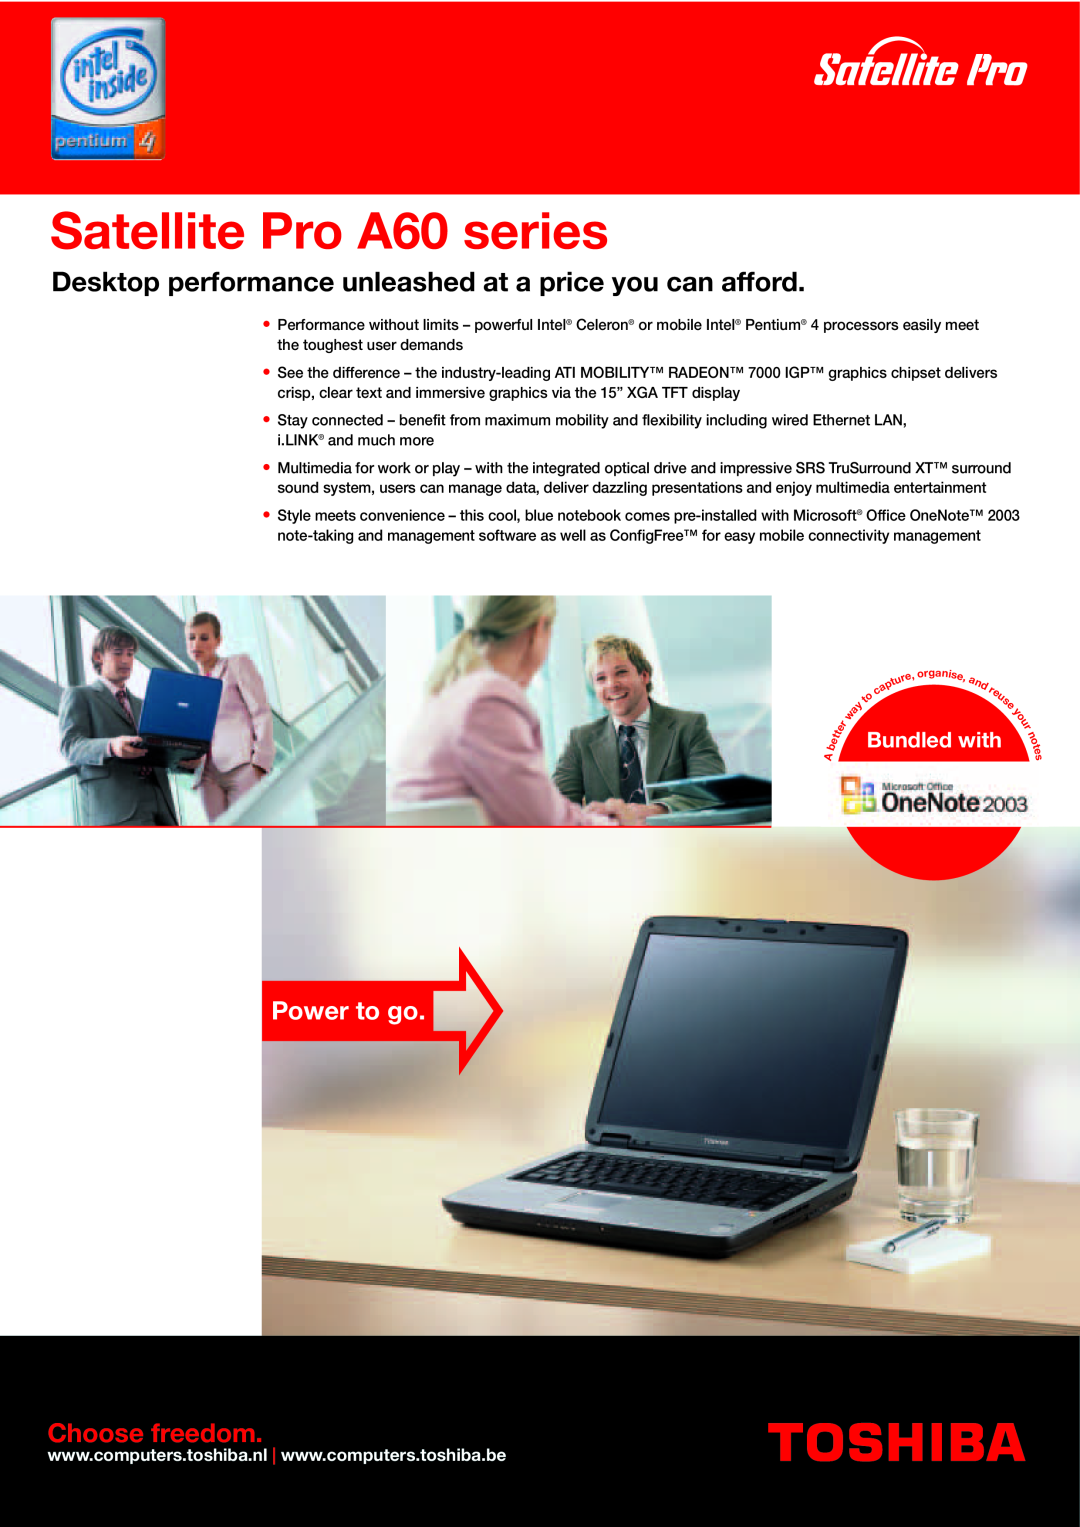 Toshiba Pro A60 Series manual Satellite Pro A60 series, Desktop performance unleashed at a price you can afford 